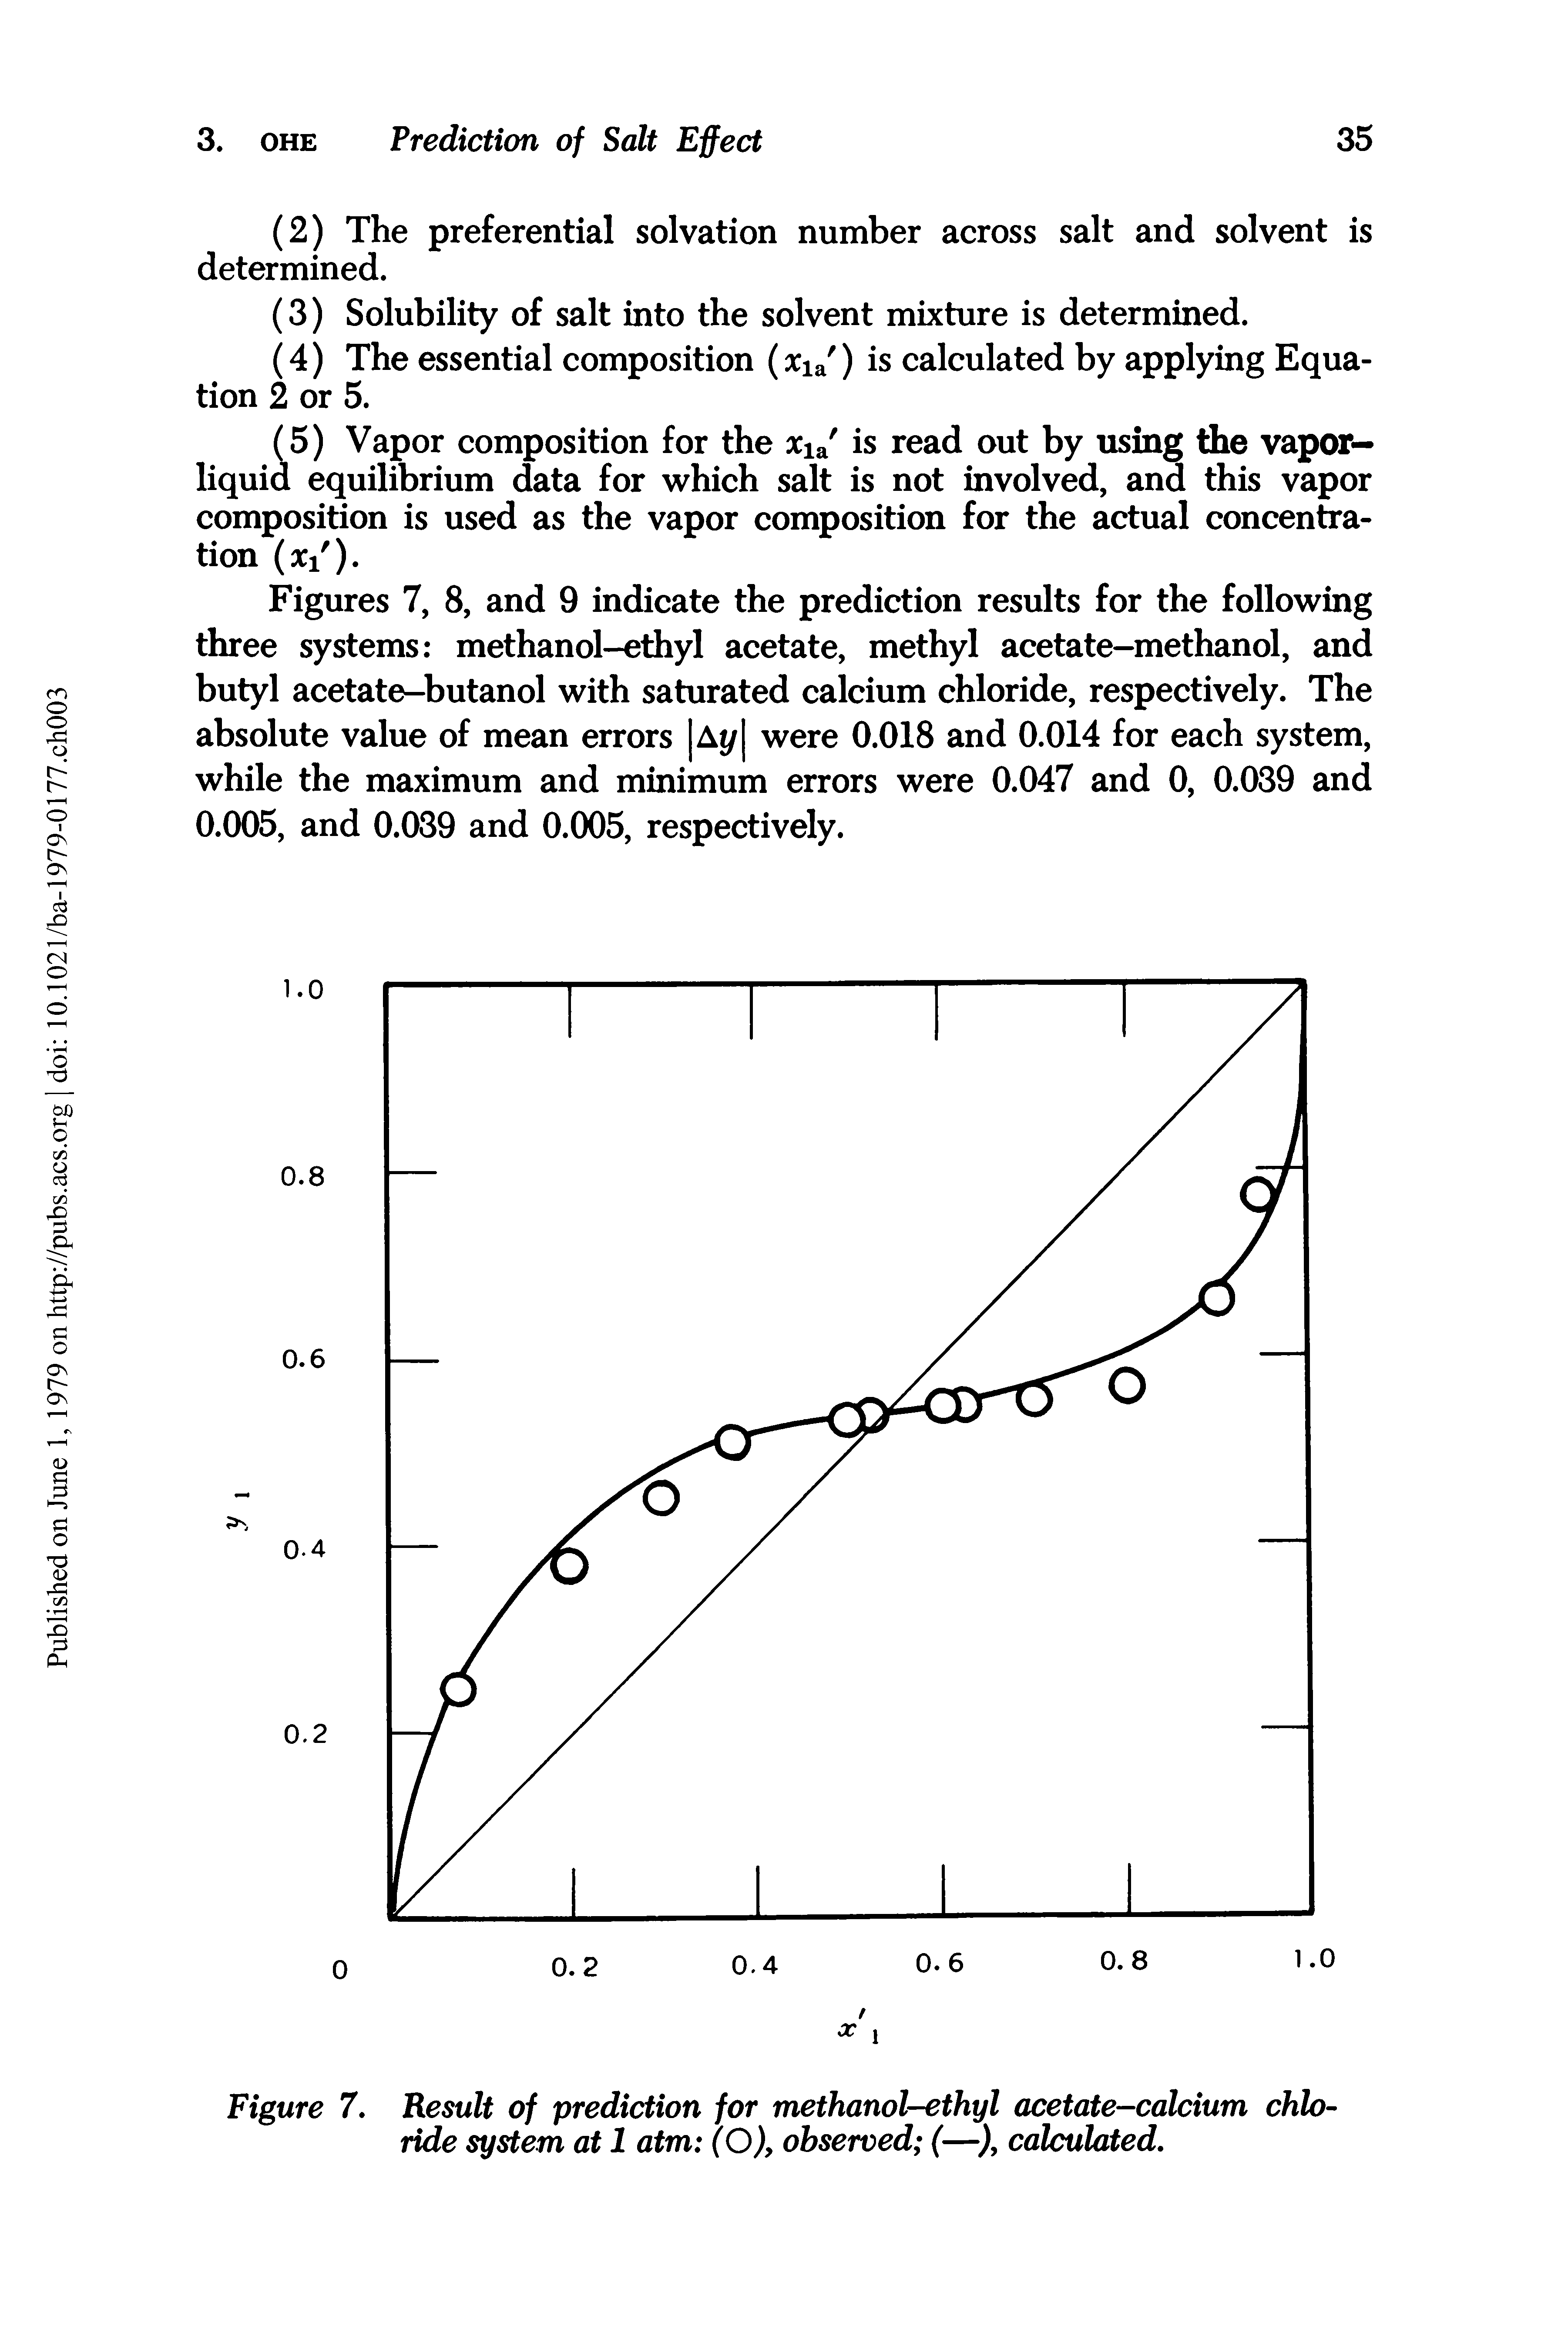 Figure 7. Result of prediction for methanol-ethyl acetate-calcium chloride system at 1 atm (O), observed (—), calculated.